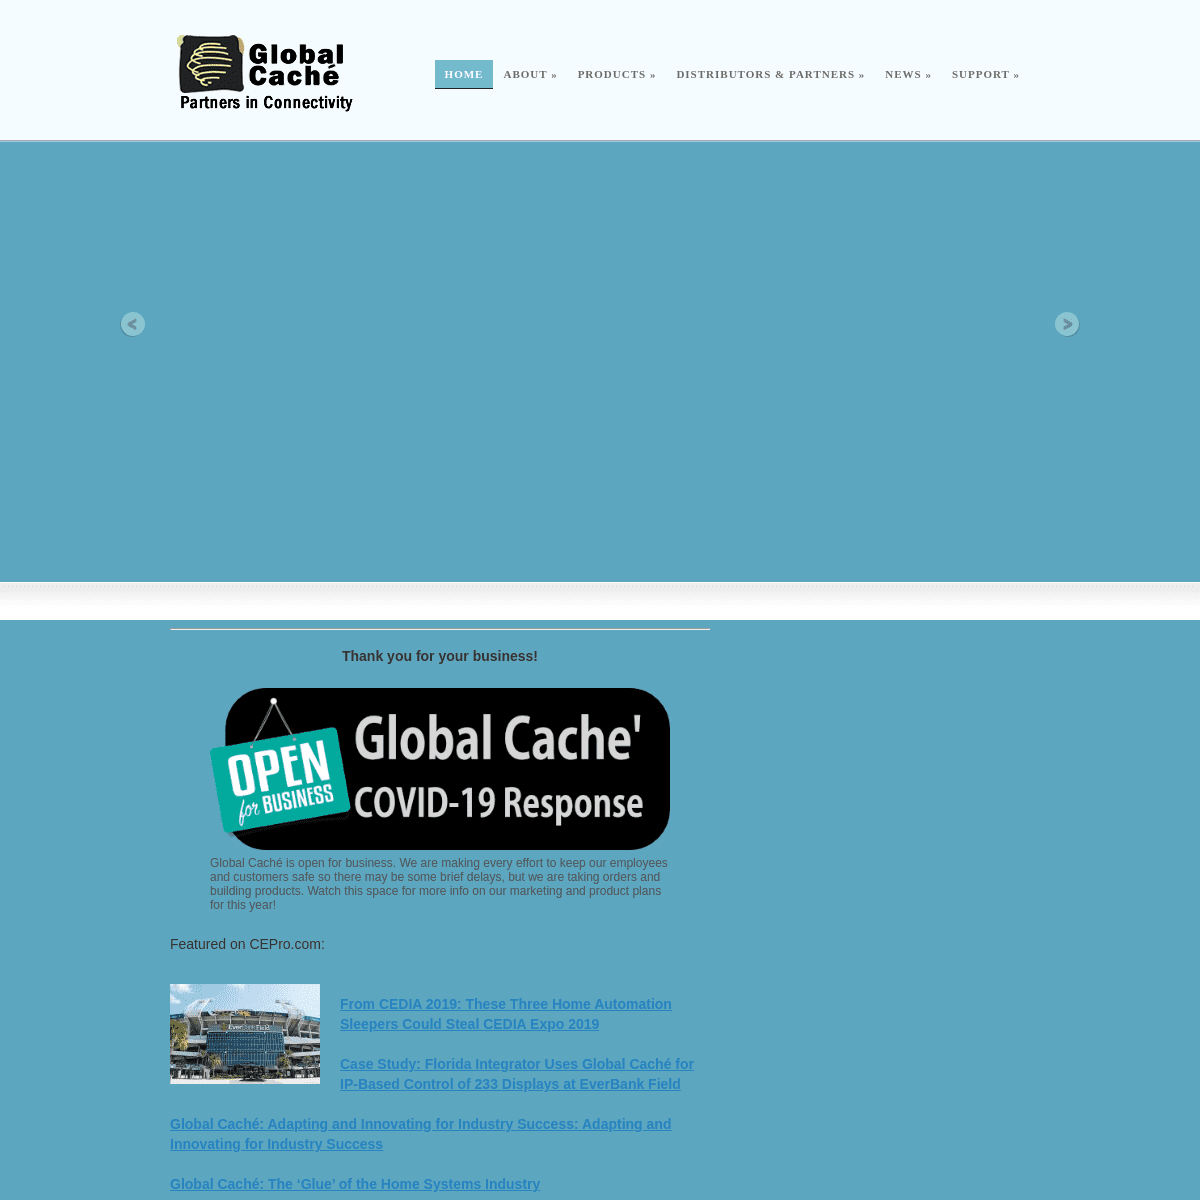 A complete backup of https://globalcache.com